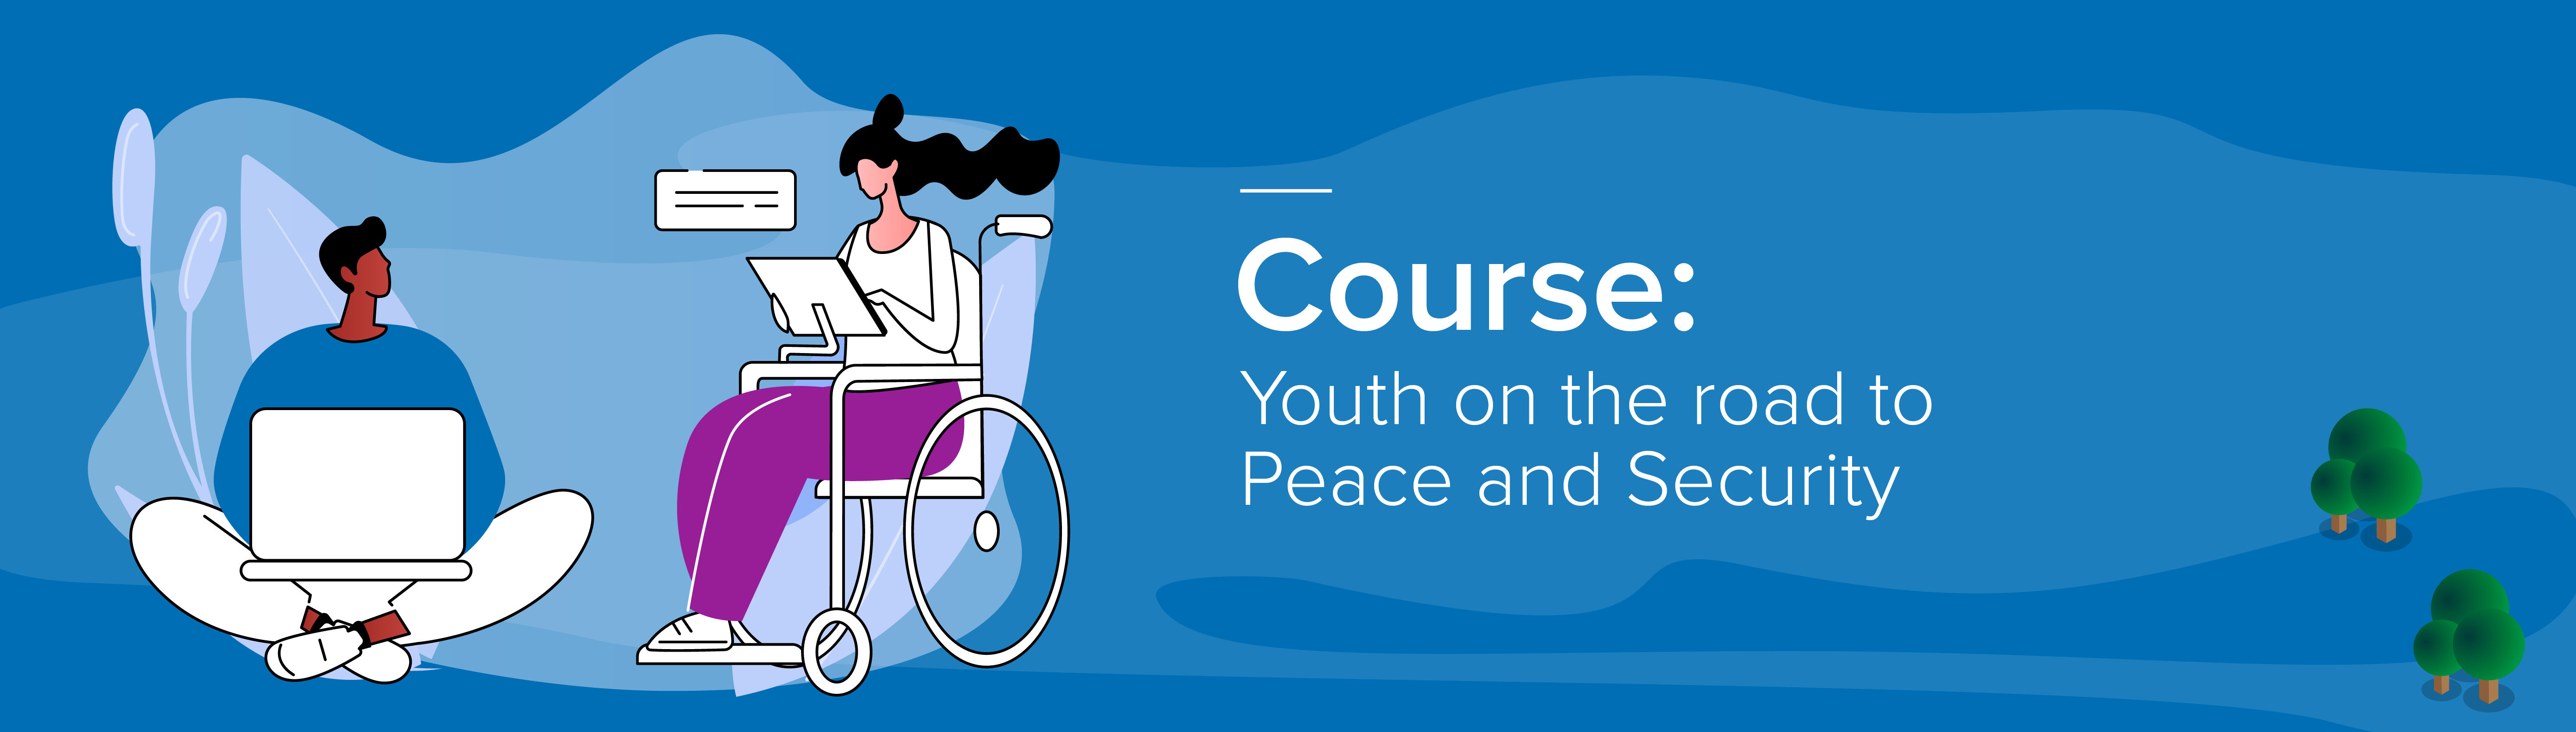 Youth on the road to Peace and Security (I)